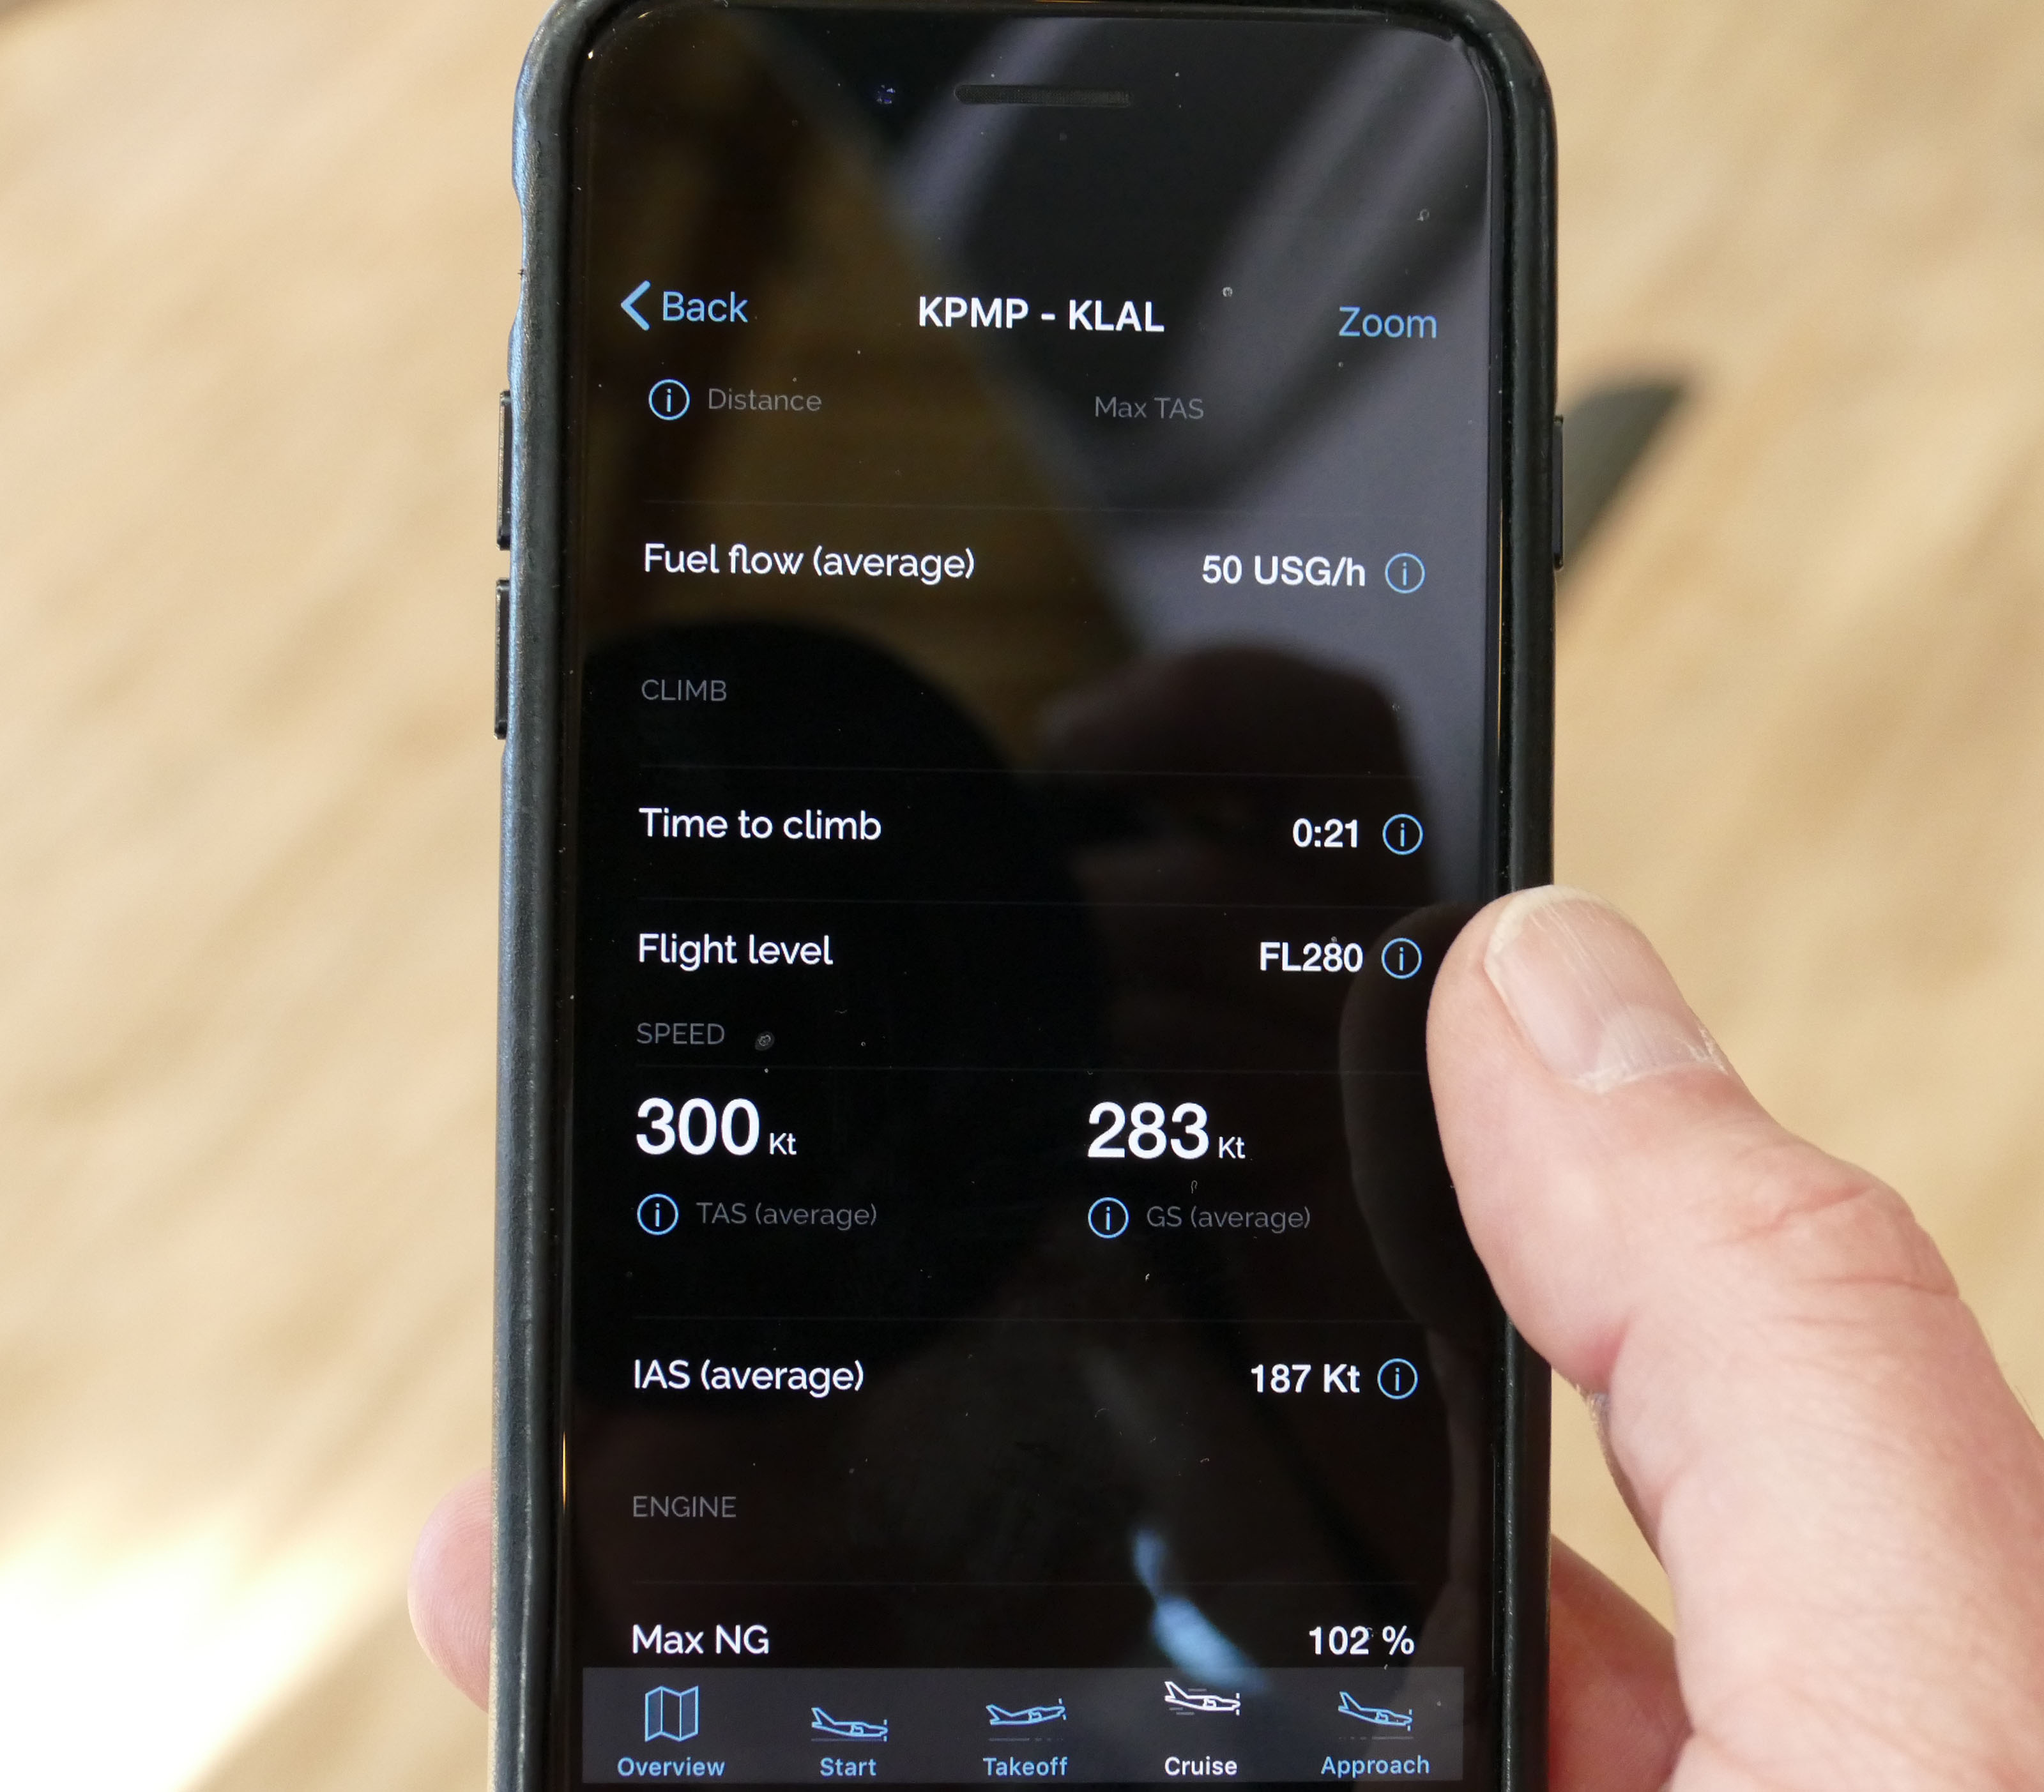 The Me and My TBM smartphone app for TBM 910 and 930 models, available for iPhone and Android, collects and displays flight data. Photo by Tom Horne.